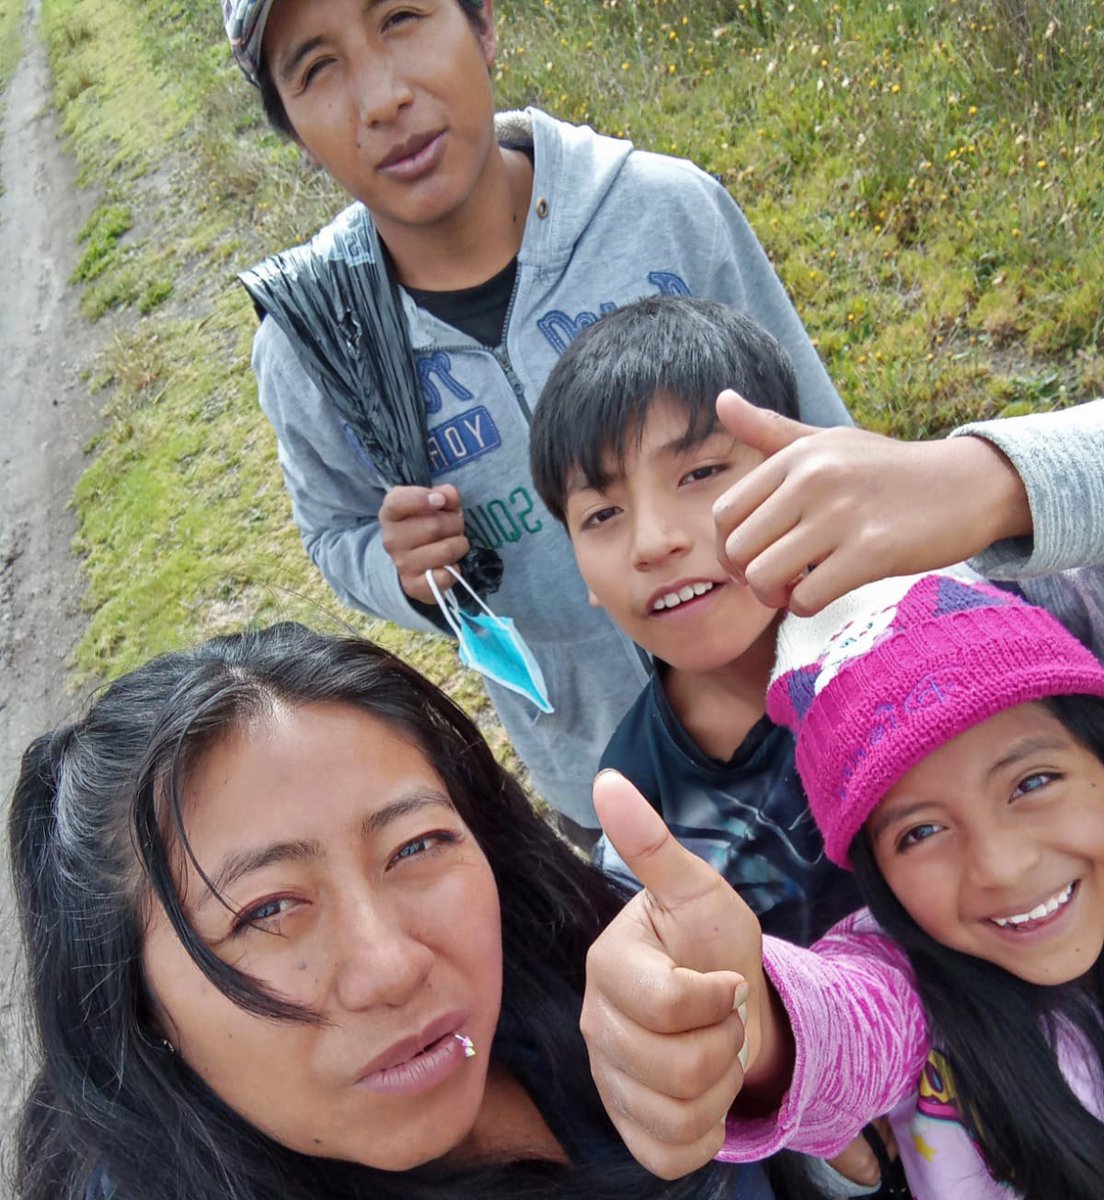 👪The family is the foundation of a strong and prosperous society, where life begins, and love never ends- @fsembrar understands that. 

On this #InternationalFamilyDay, we share Fabiola's story: avsi-usa.org/internationald…

#PeopleforDevelopment #Ecuador #DiaInternacionaldelaFamilia